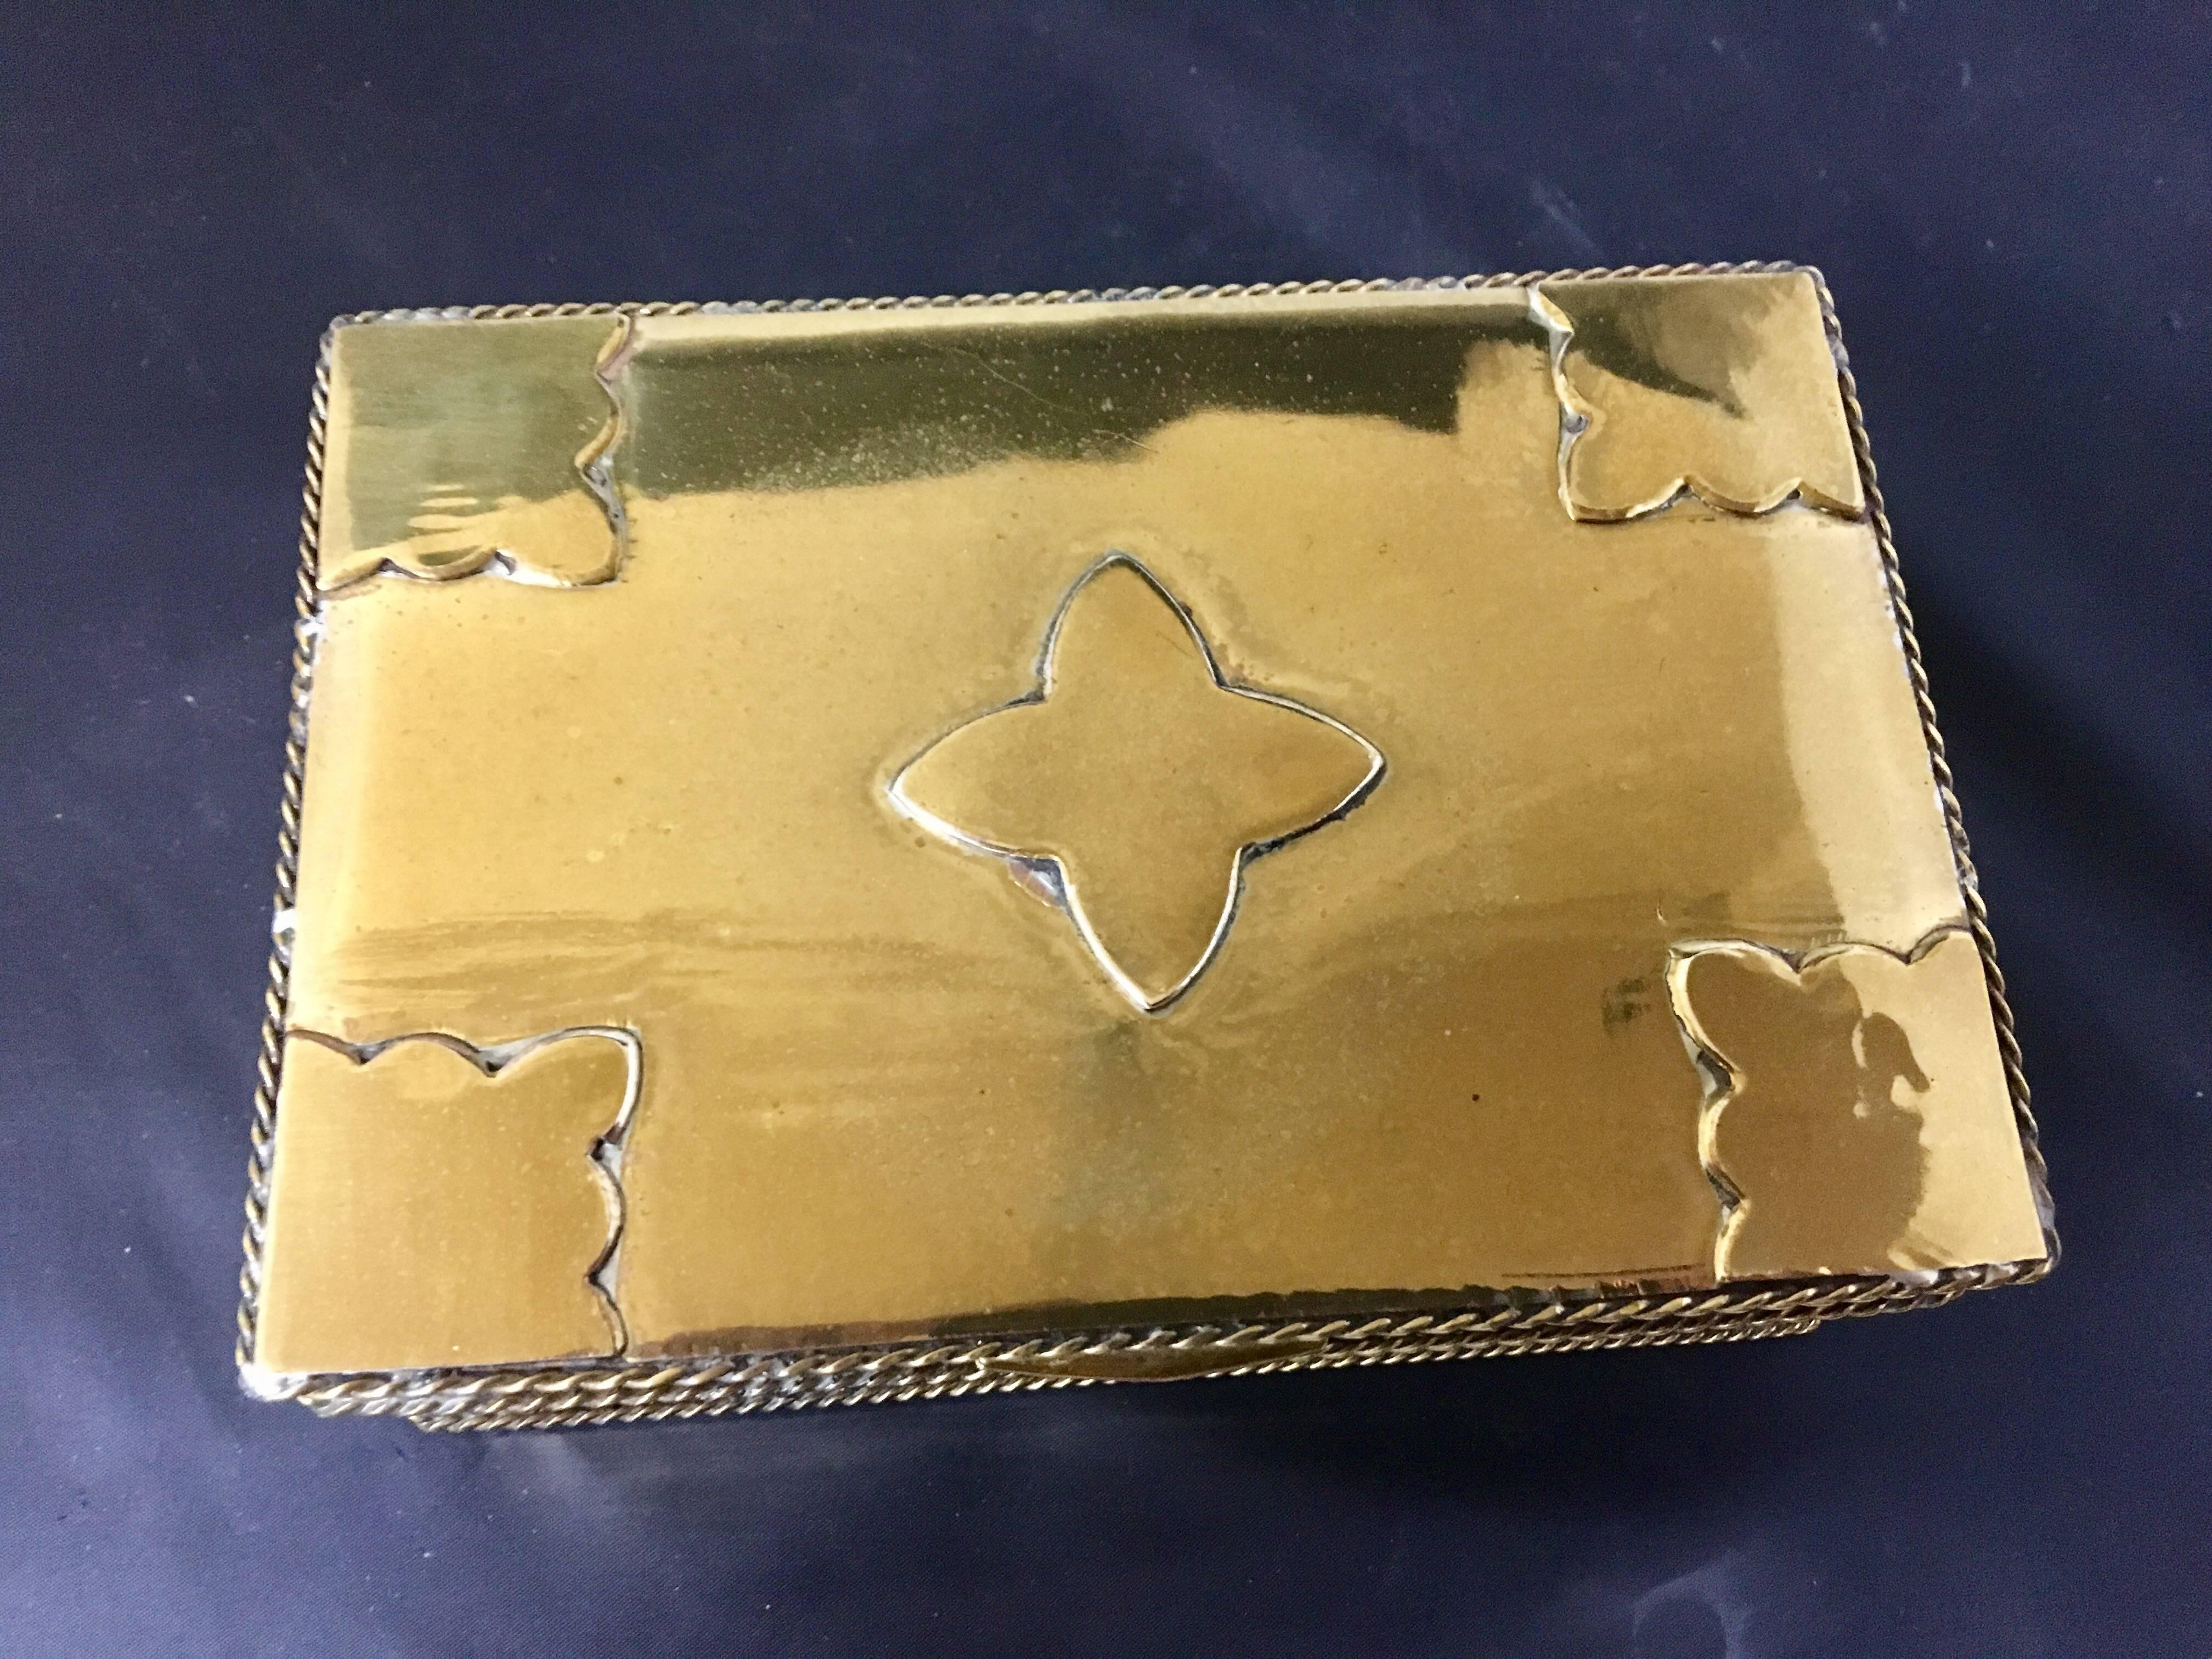 Simple and elegant polished brass box lined with solid mahogany insert, circa 1970s Perfect for jewelry, trinkets or playing cards.  Bin #N